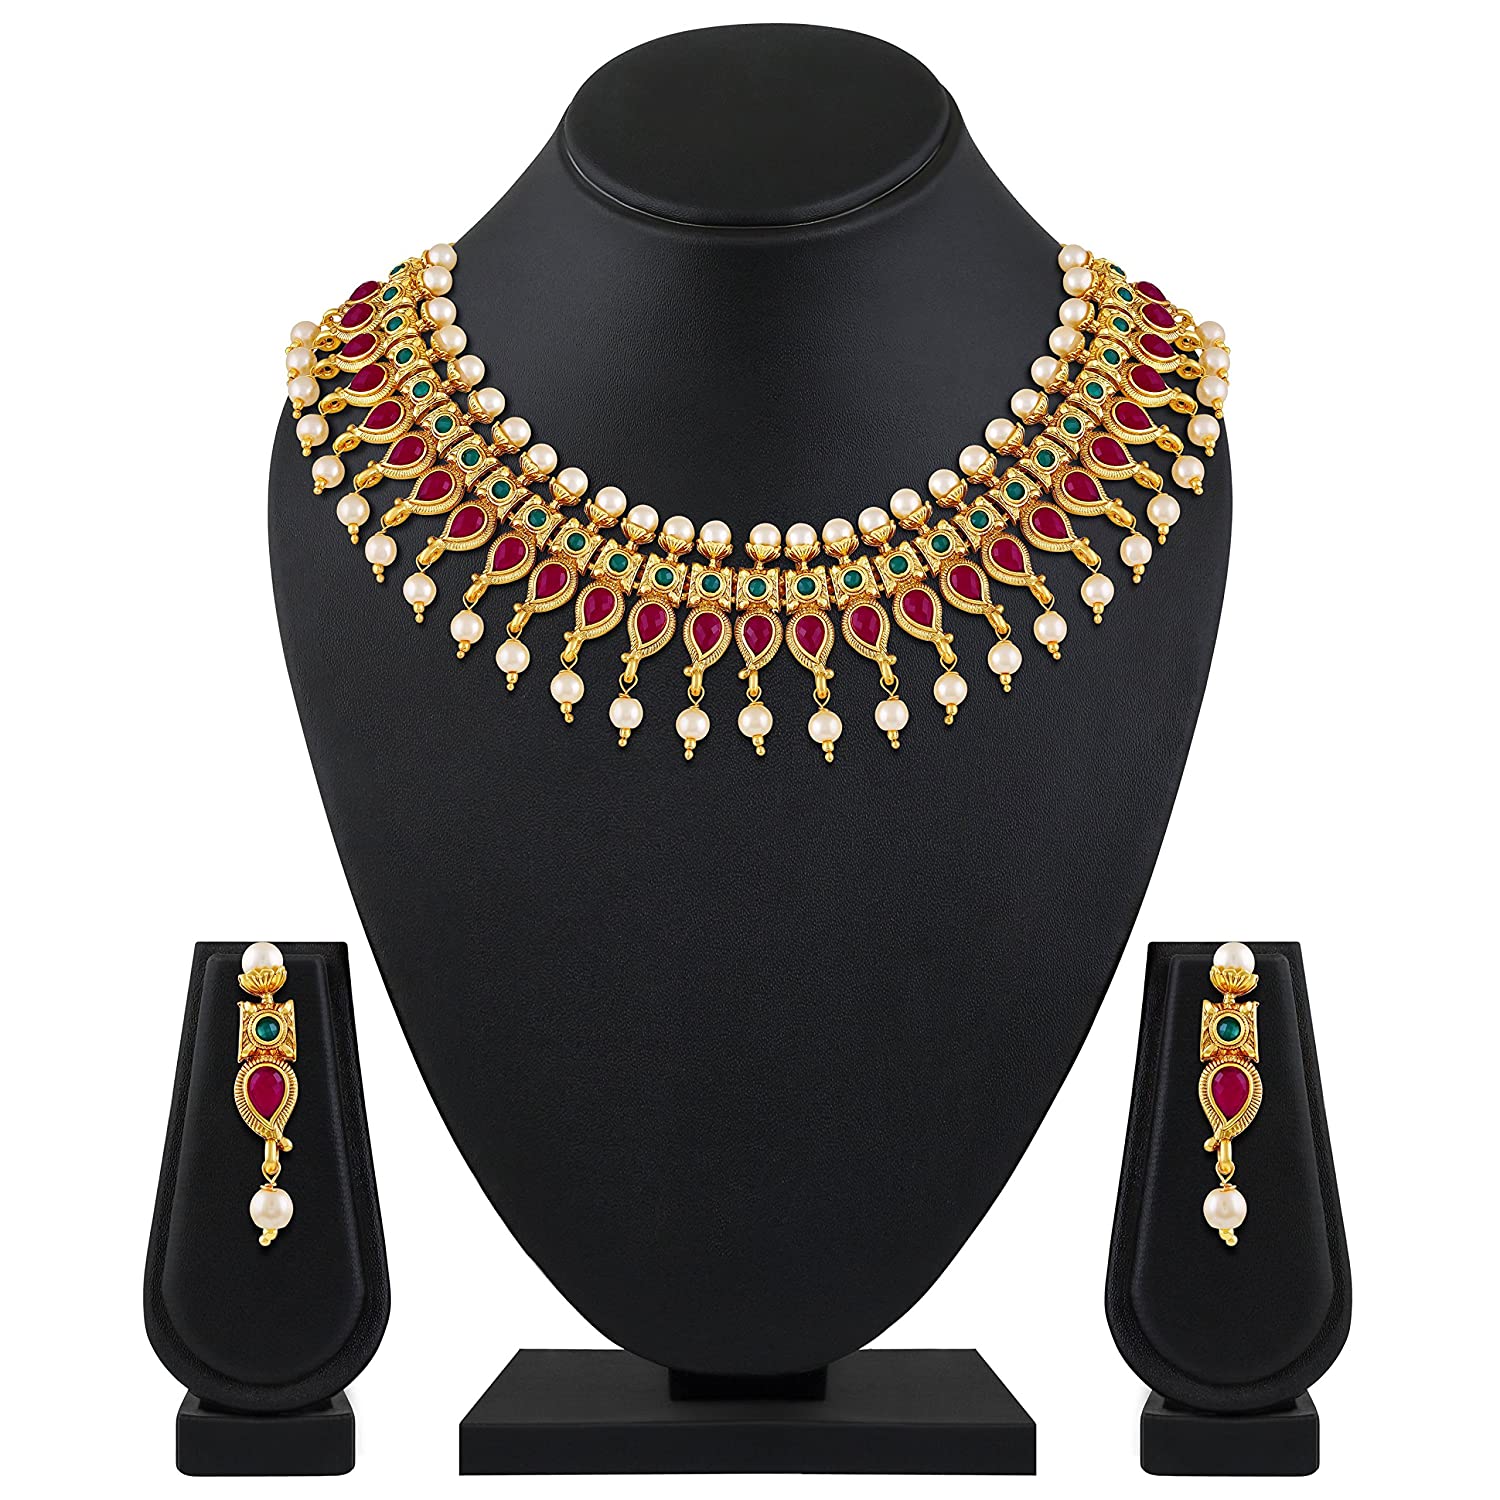 Accessorise With Artificial Jewellery On Amazon